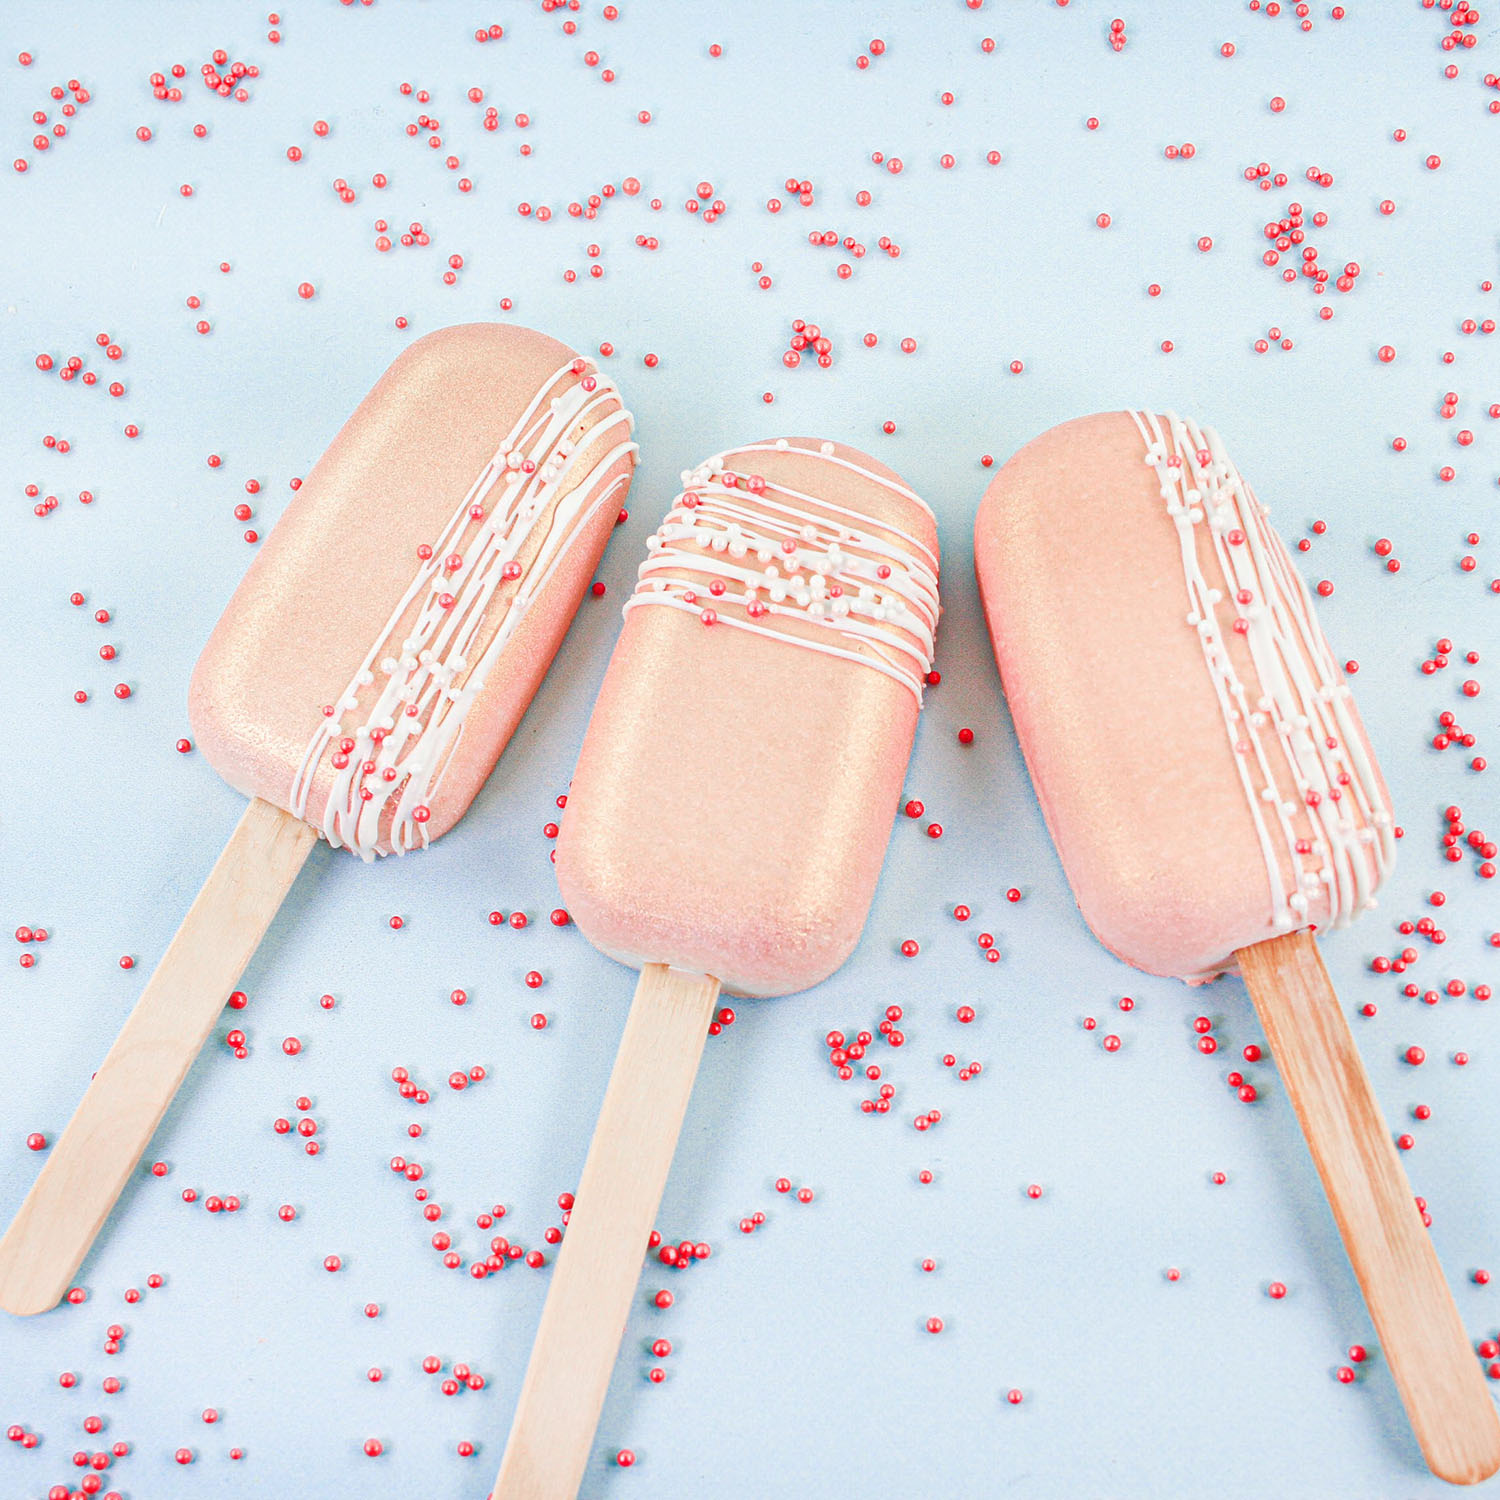 rose gold and white cakesicles for Valentines or Weddings